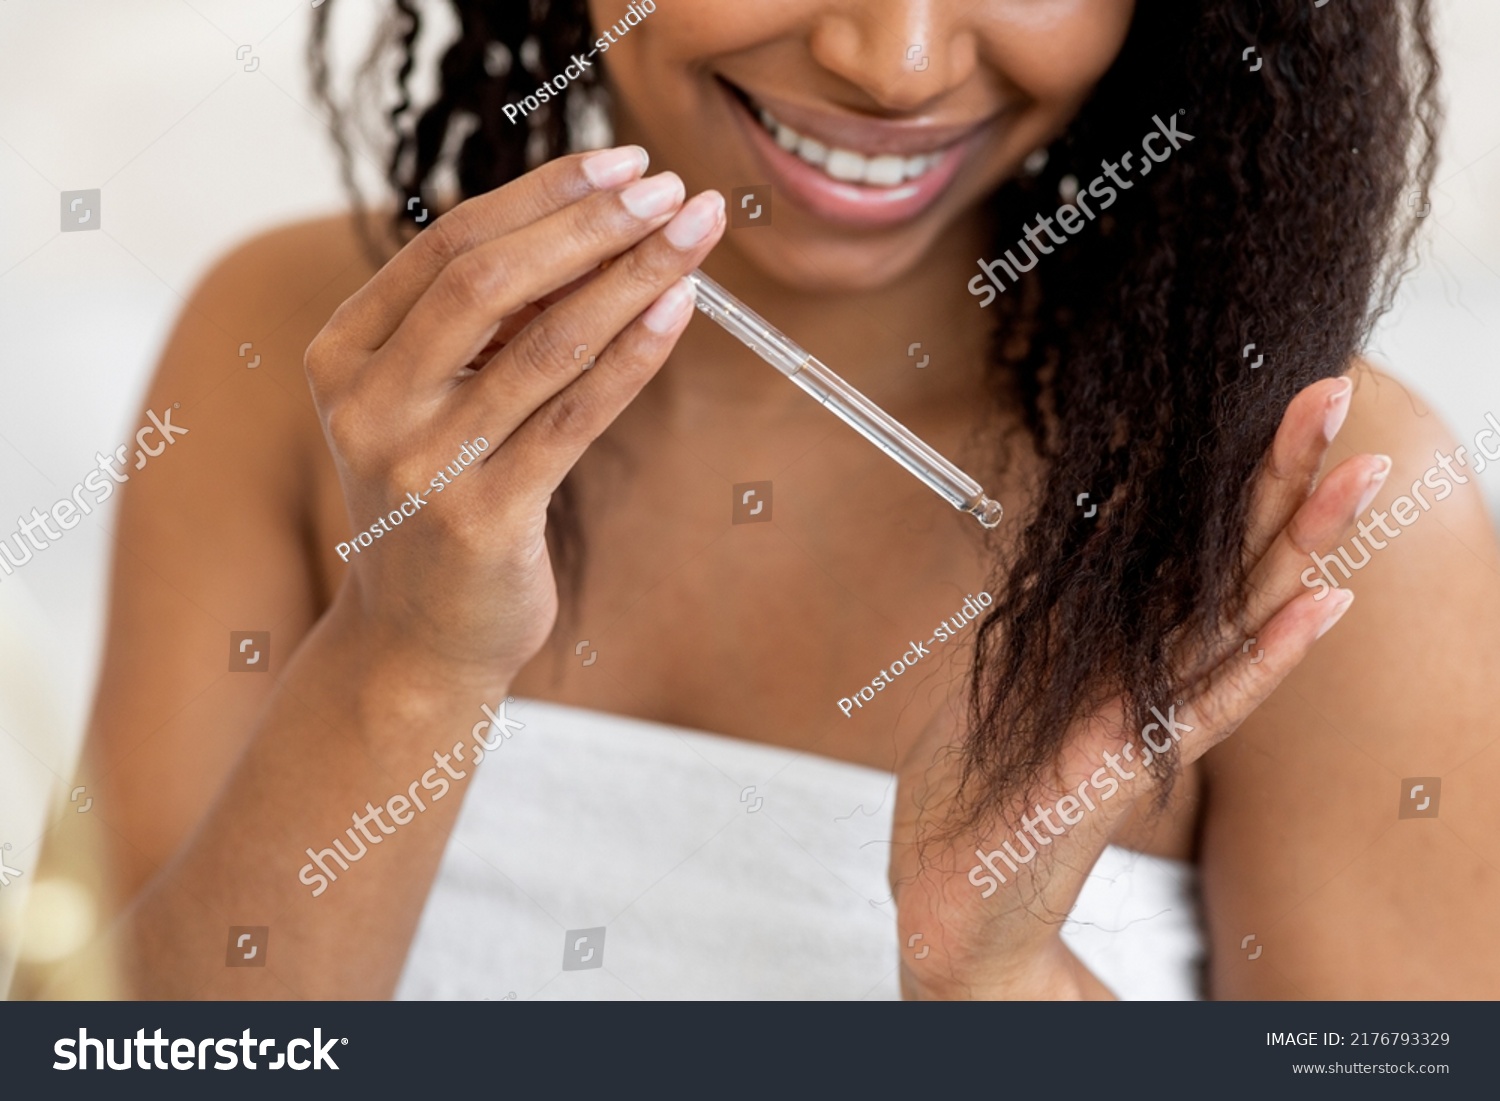 Split Ends Care. Smiling African American Woman Applying Moisturising Oil To Her Curly Hair, Closeup Of Young Black Female Putting Haircare Product With Dropper While Making Beauty Routine At Home #2176793329